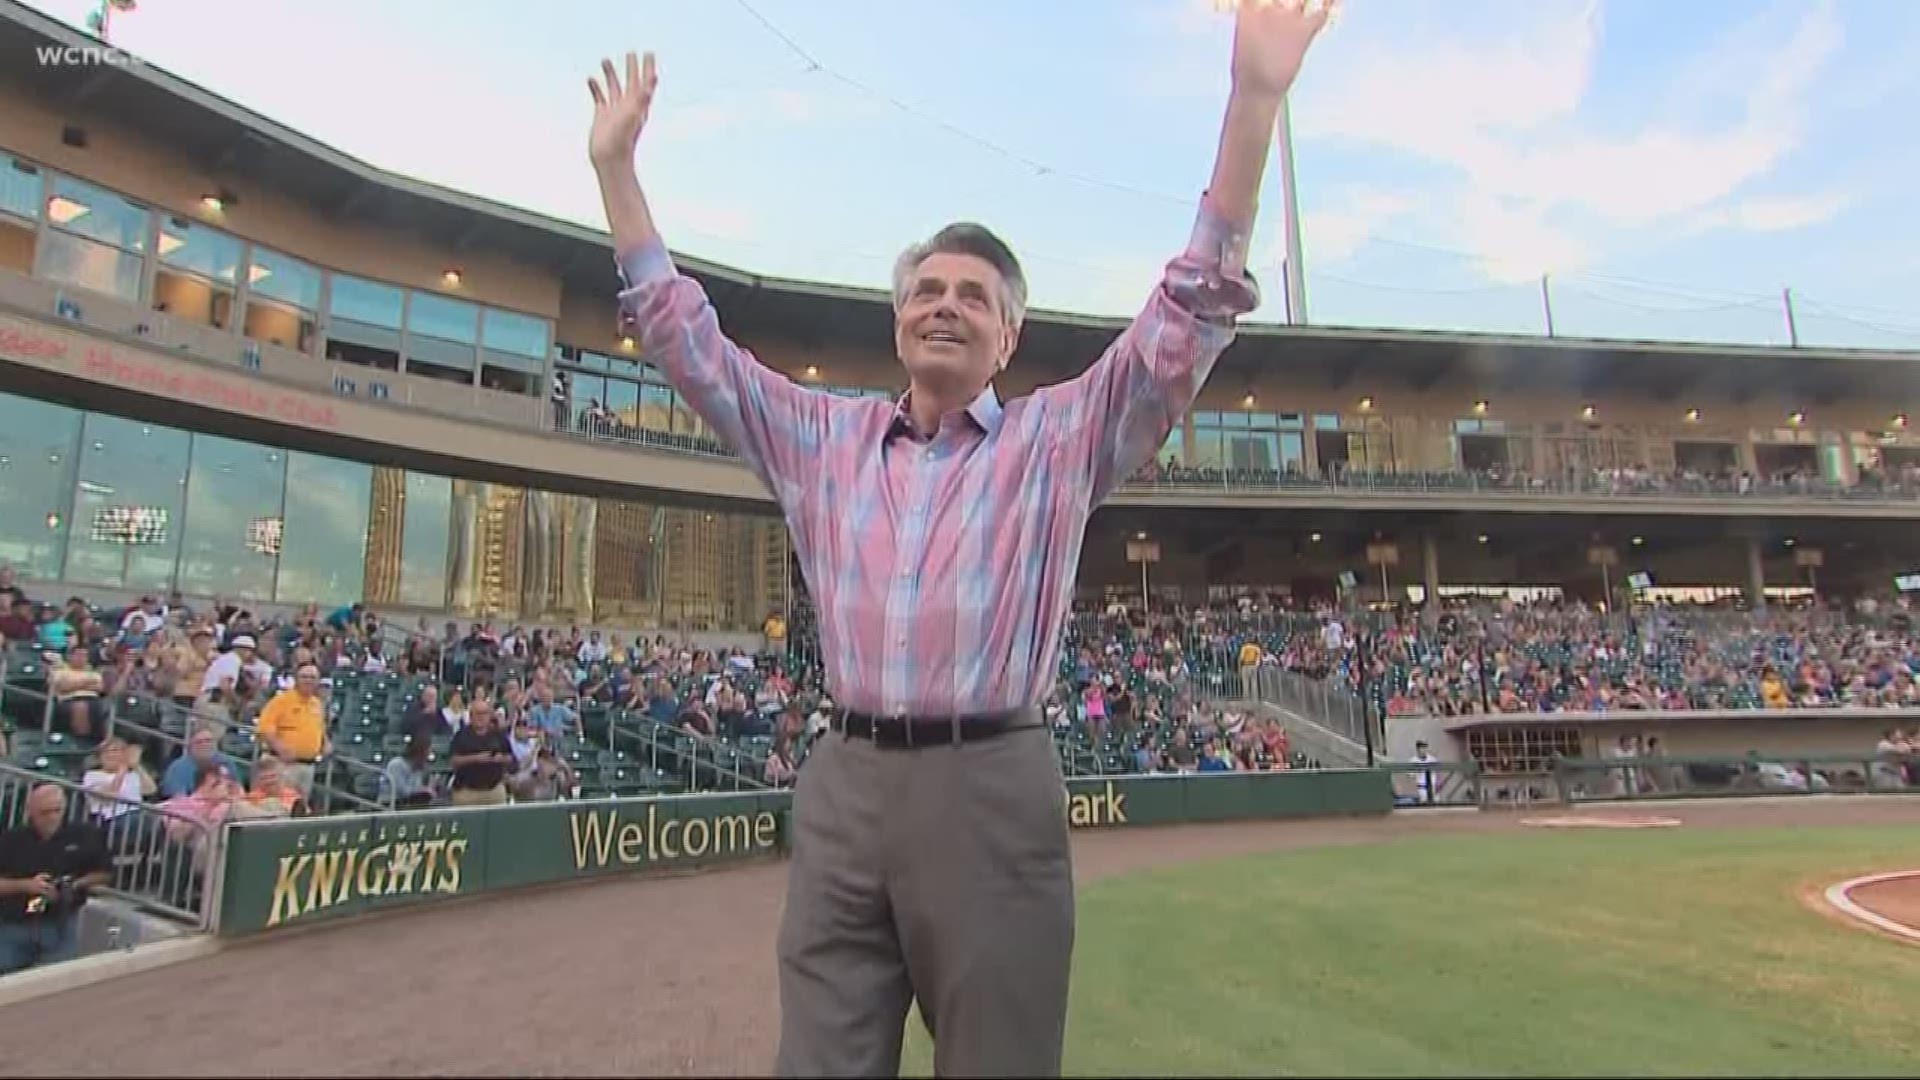 First Warn Forecaster Larry Sprinkle said he'll never forget the night in 2017 when the Charlotte Knights paid tribute to him after a terrifying accident left him in the hospital for weeks.